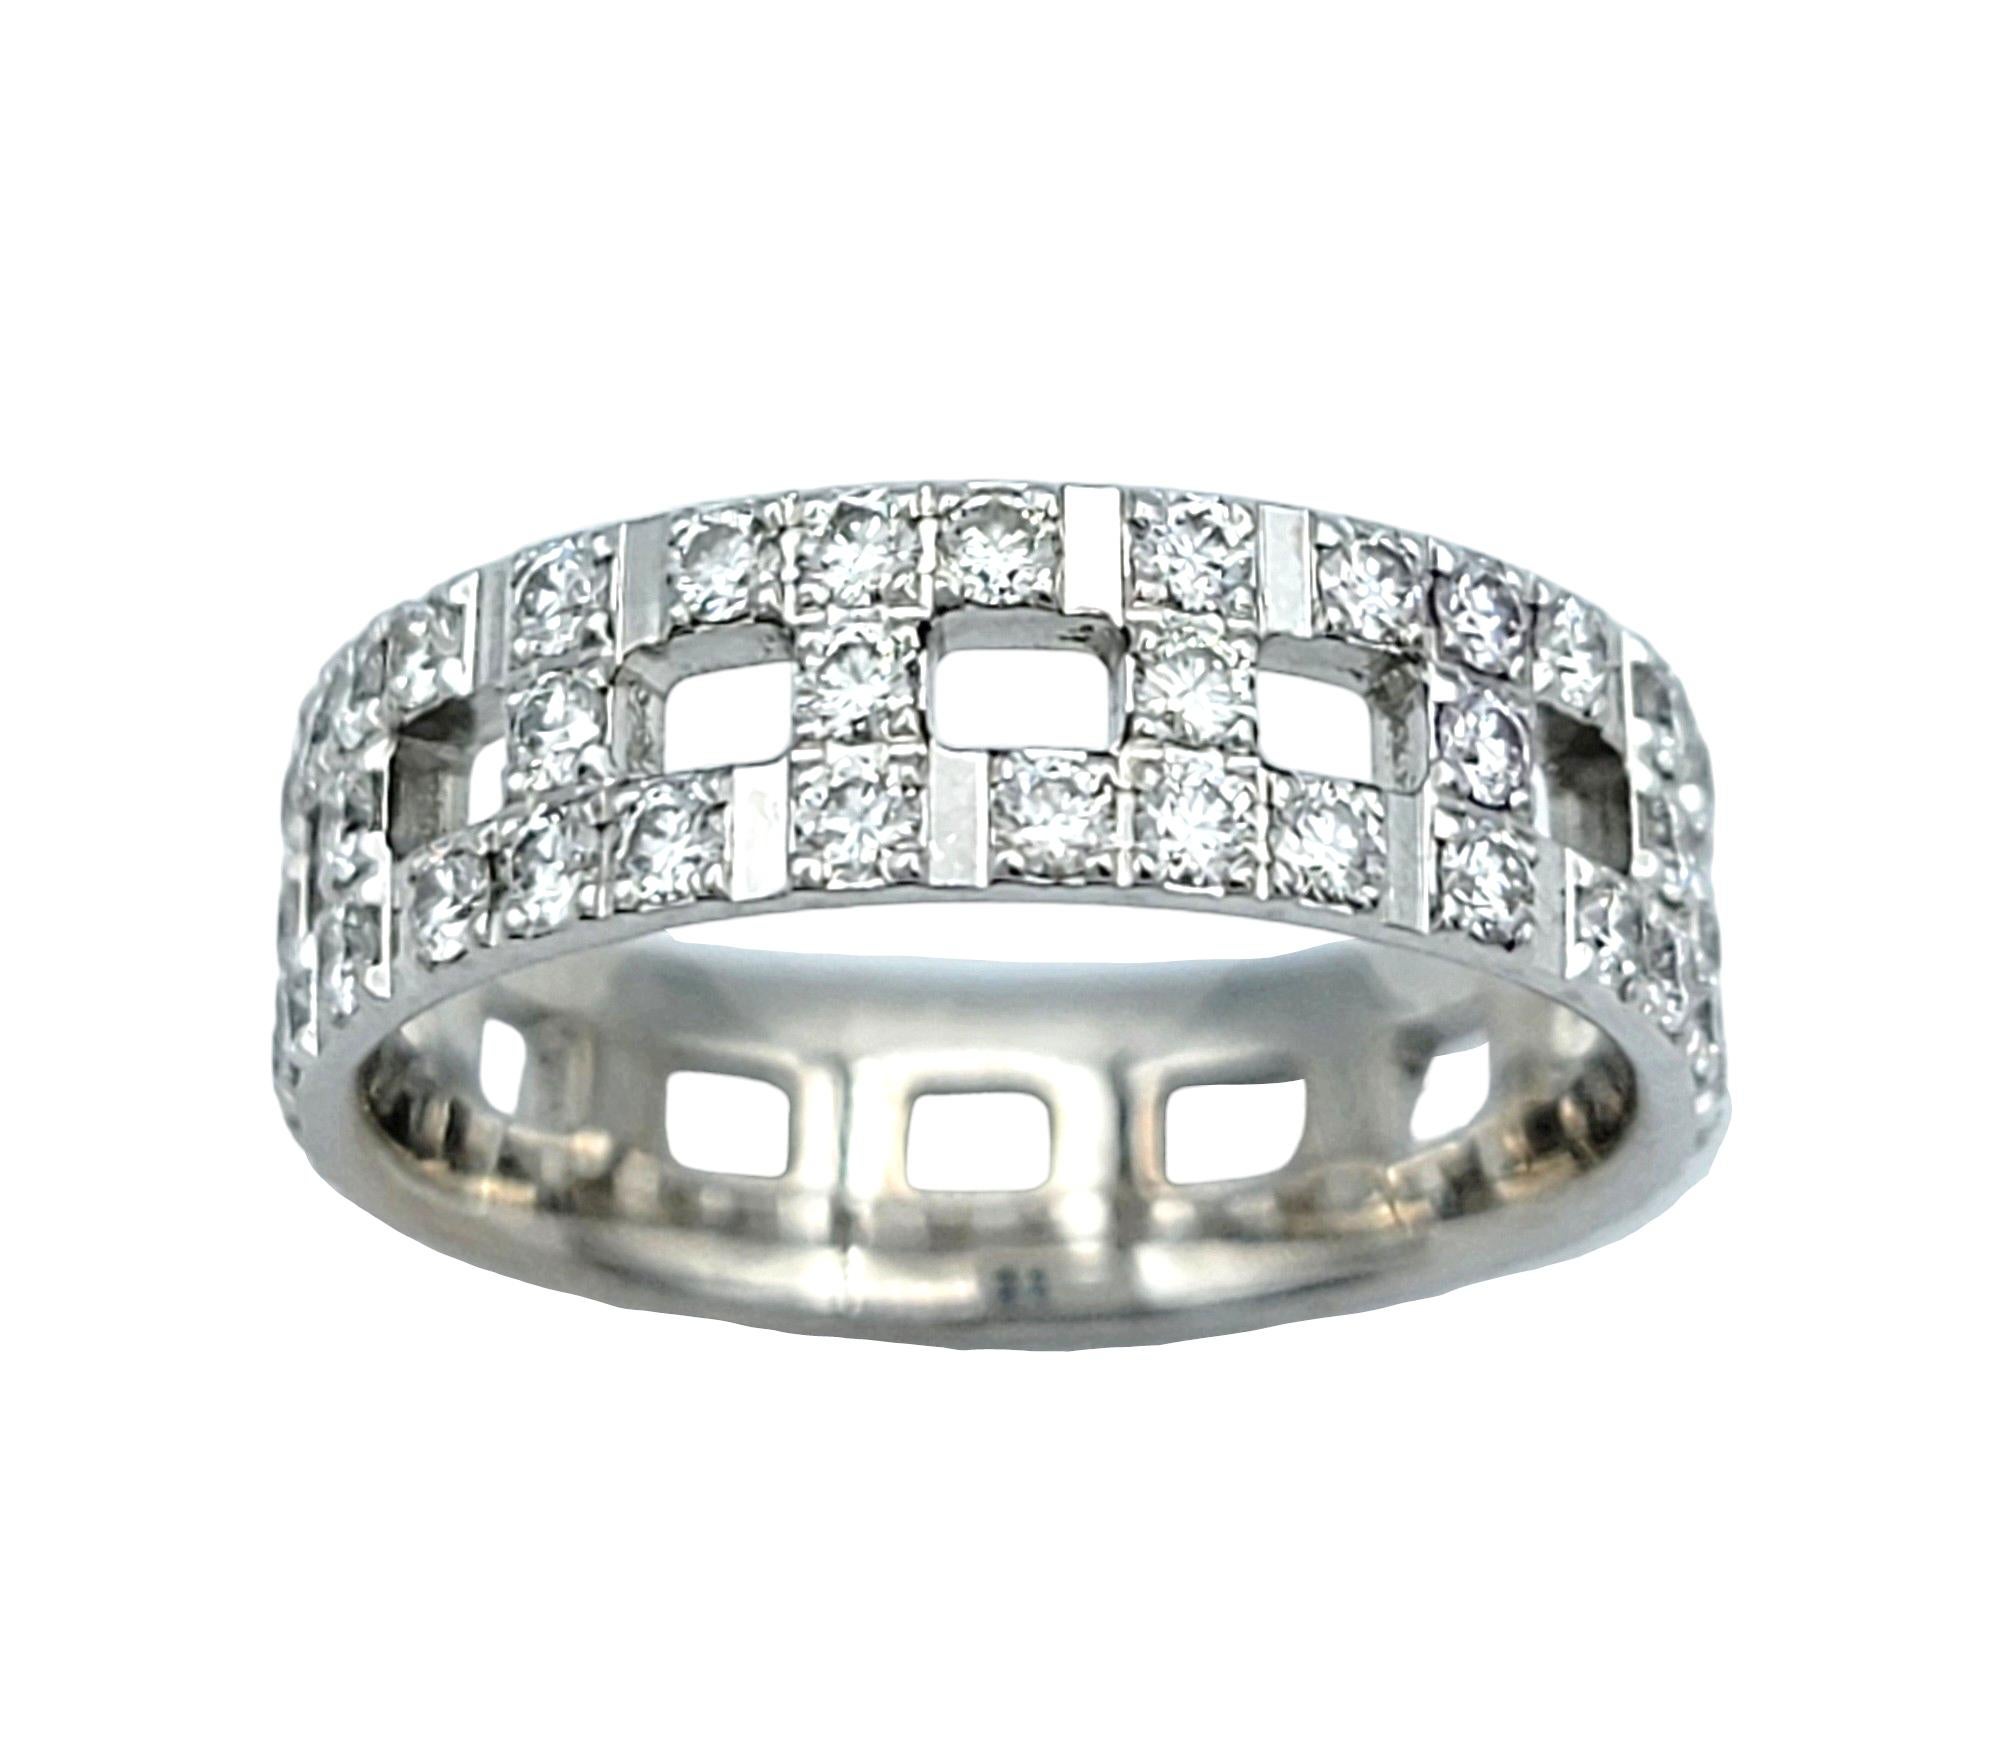 Ring size: 5.75

This dazzling Tiffany T True diamond band ring is absolutely striking on the finger.  Founded in 1837 in New York City, Tiffany & Co. is one of the world's most storied luxury design houses recognized globally for its innovative